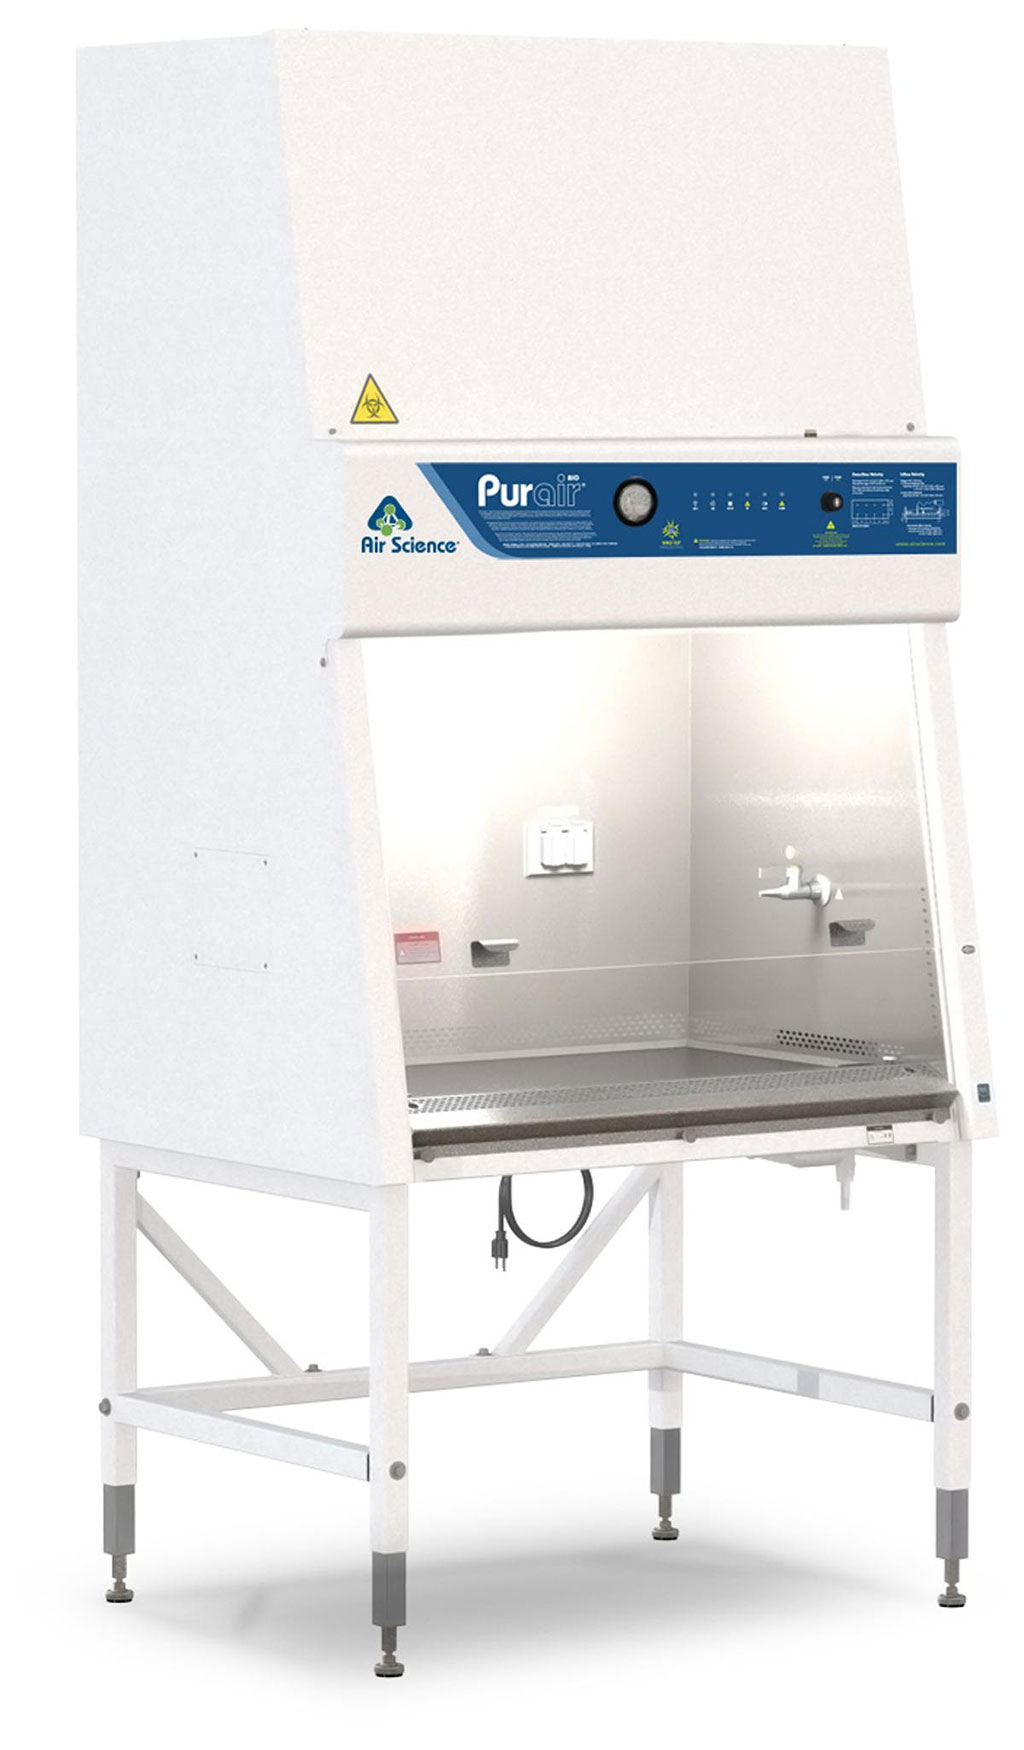 Image: The Purair® BIO biological safety cabinet (Photo courtesy of Air Science)